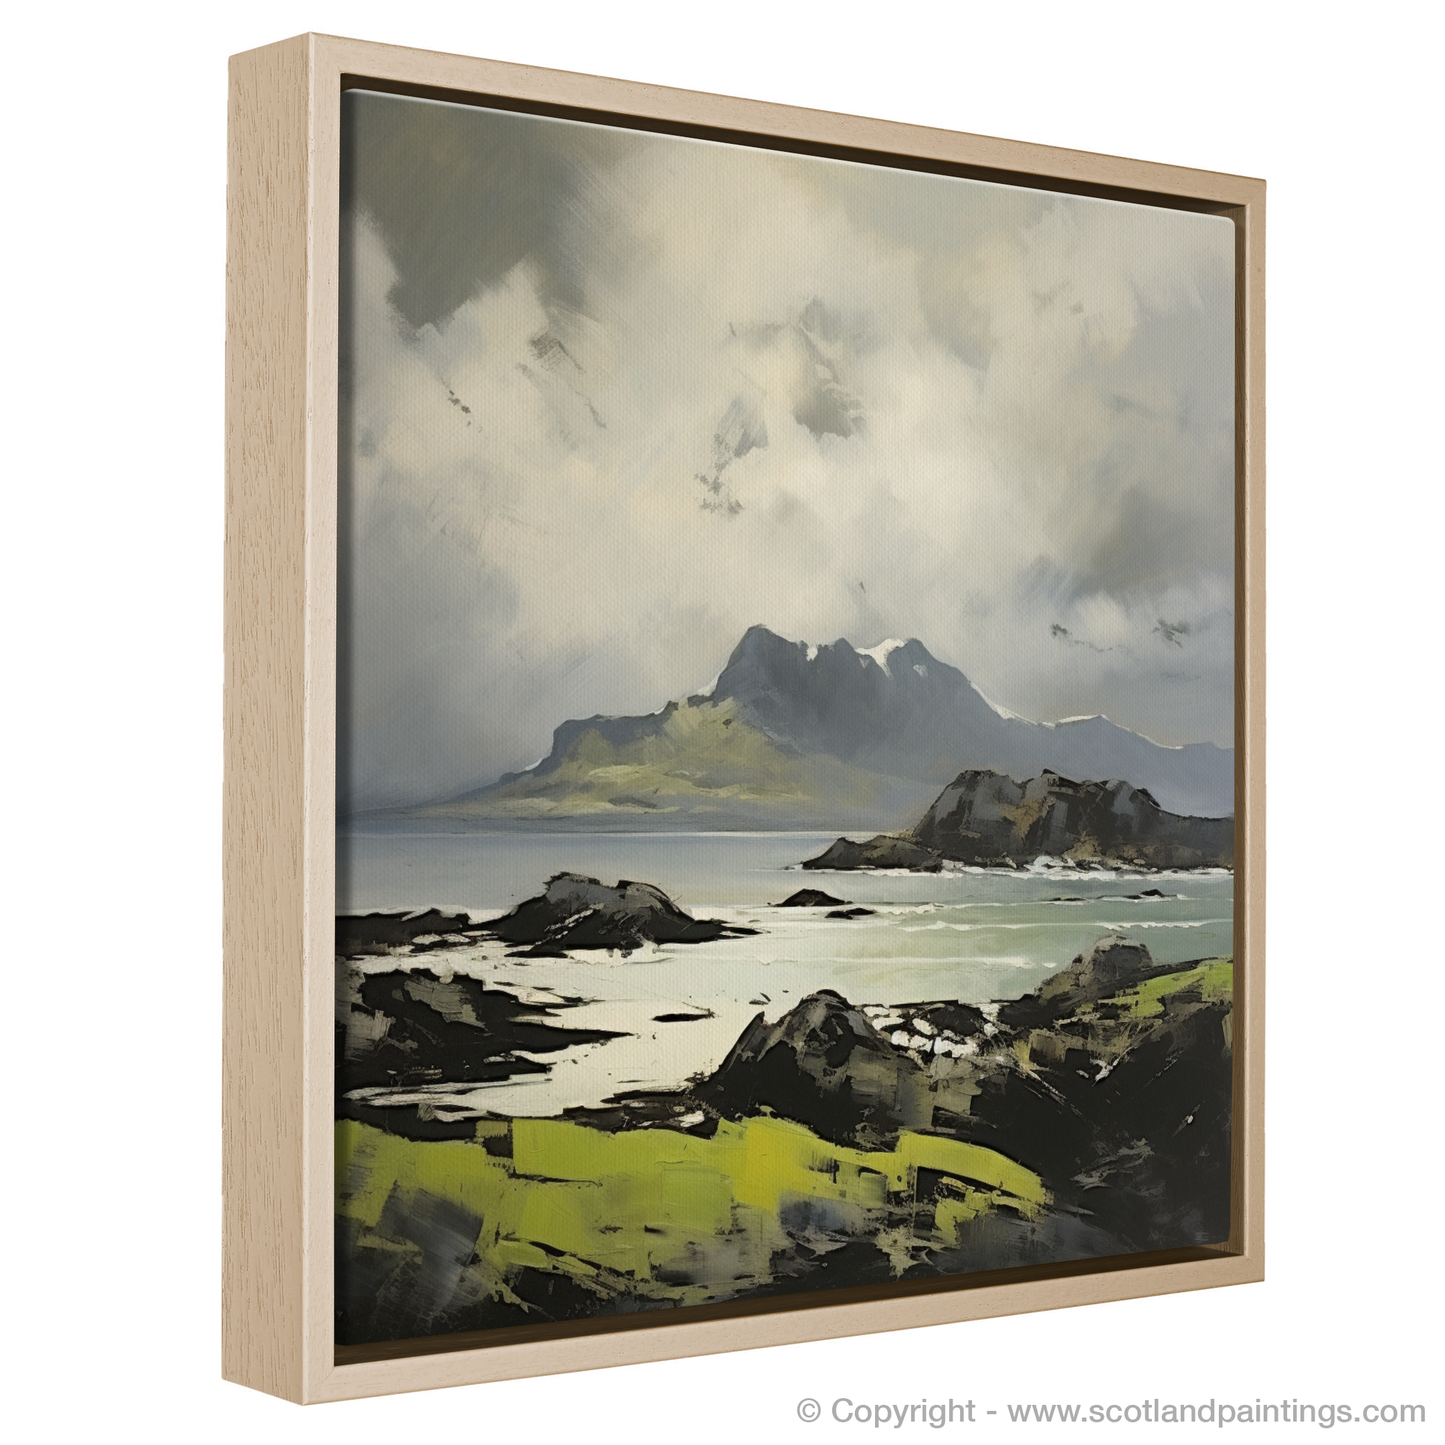 Painting and Art Print of Isle of Eigg, Inner Hebrides entitled "Isle of Eigg: An Expressionist Ode to Scotland's Wild Majesty".